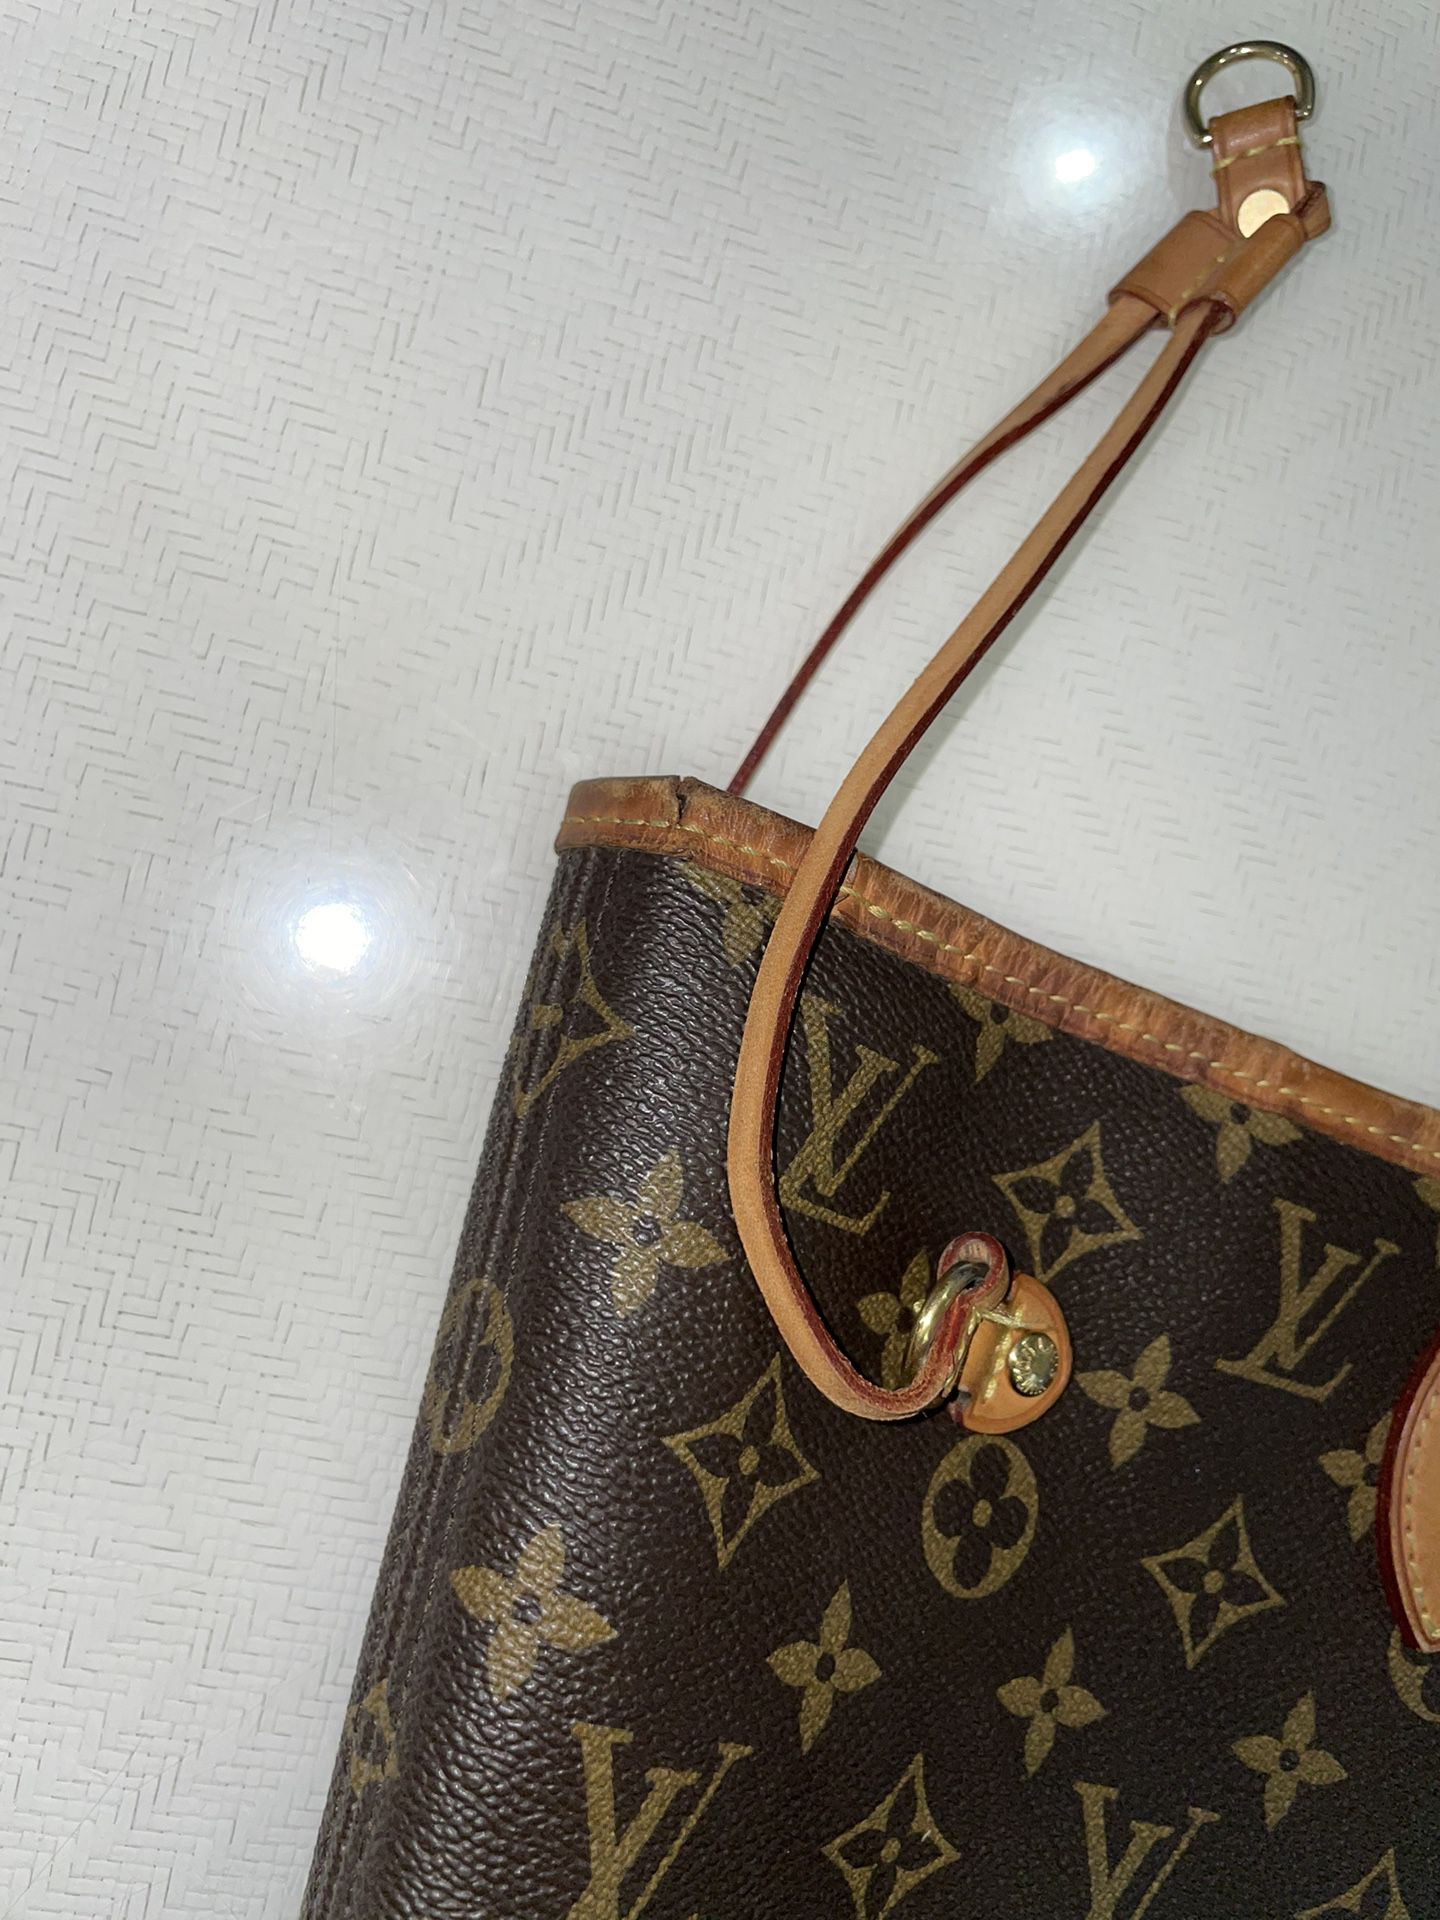 Louis Vuitton “By The Pool” Neverfull for Sale in San Mateo, CA - OfferUp